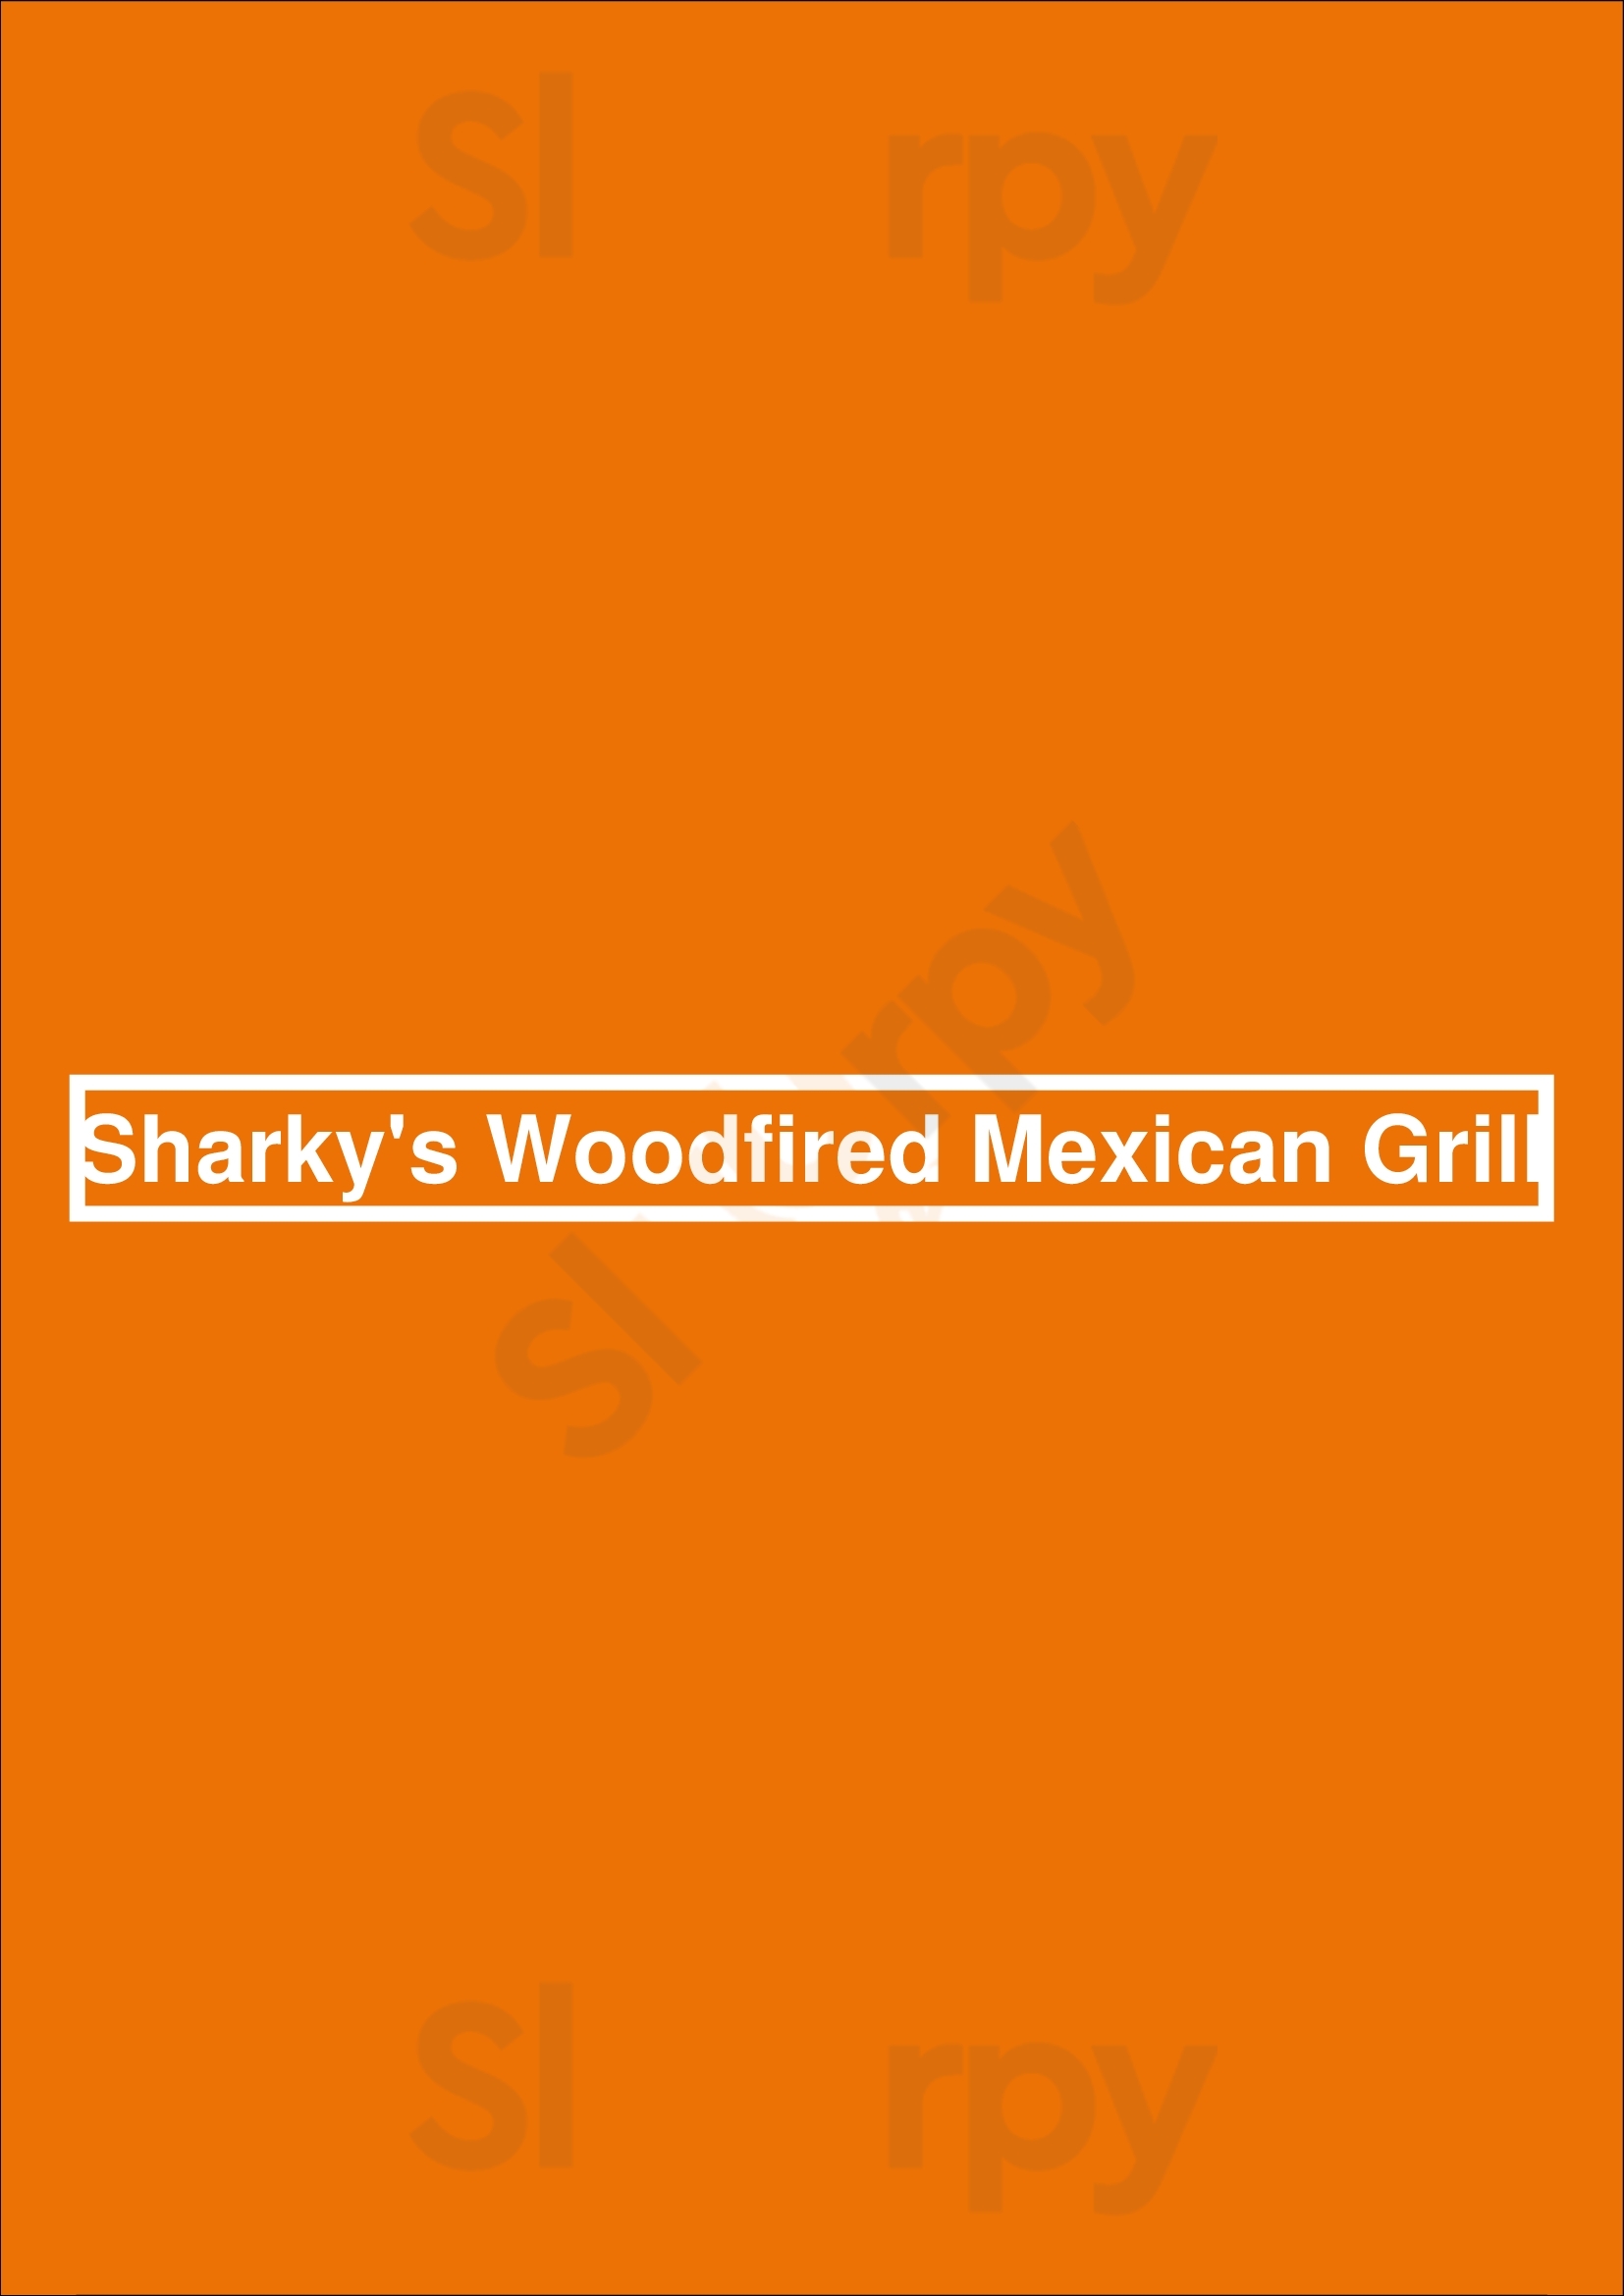 Sharky's Woodfired Mexican Grill Los Angeles Menu - 1